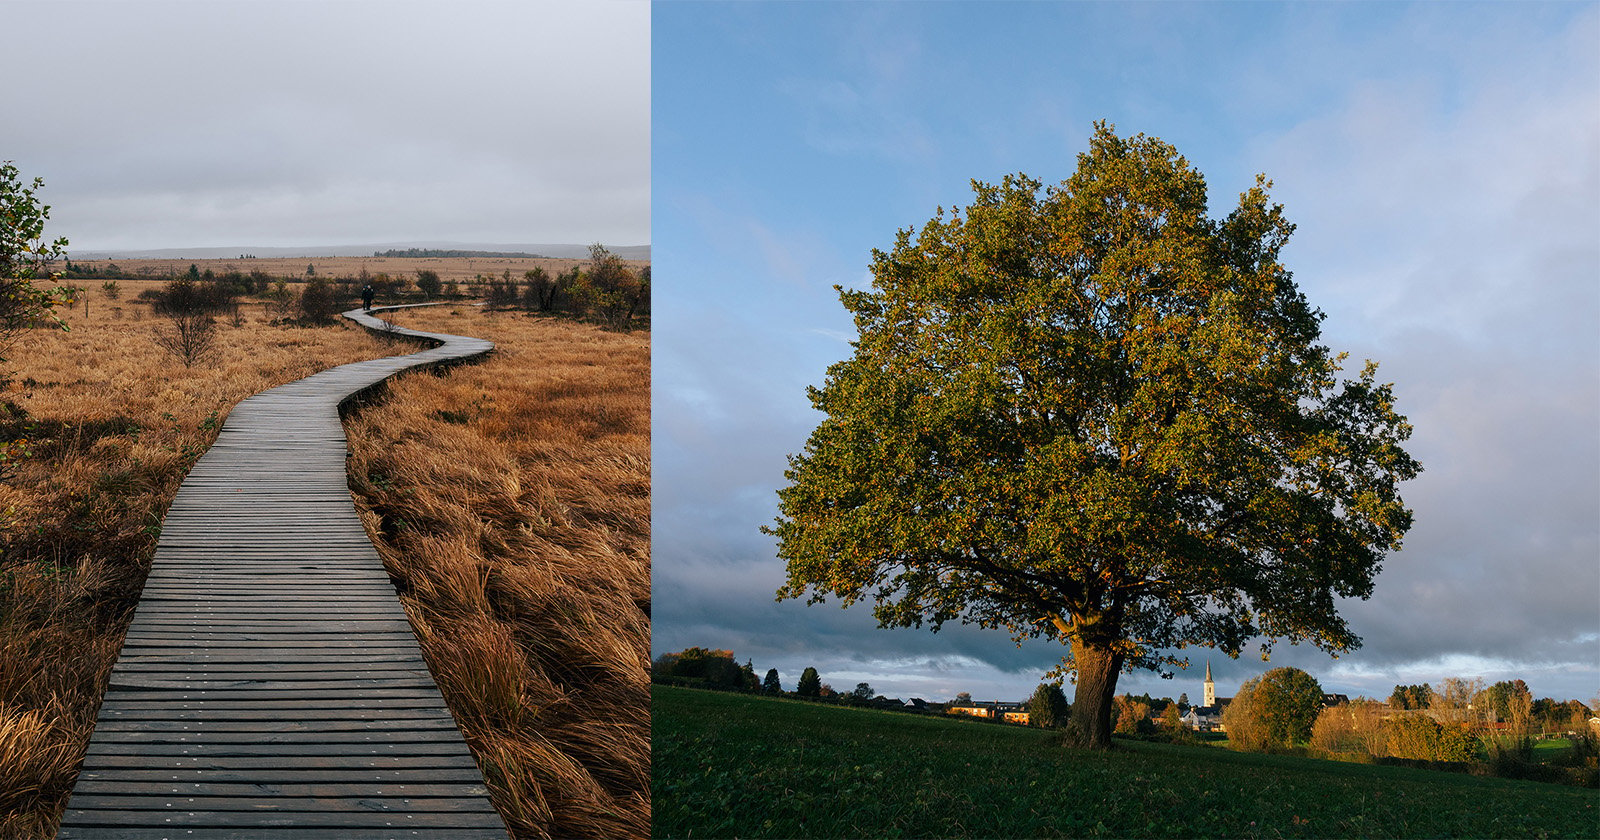 A split image: The left shows a wooden boardwalk winding through a dry, grassy landscape under a cloudy sky. The right features a lone tree with a dense canopy in a green field, bathed in the warm light of either sunrise or sunset.